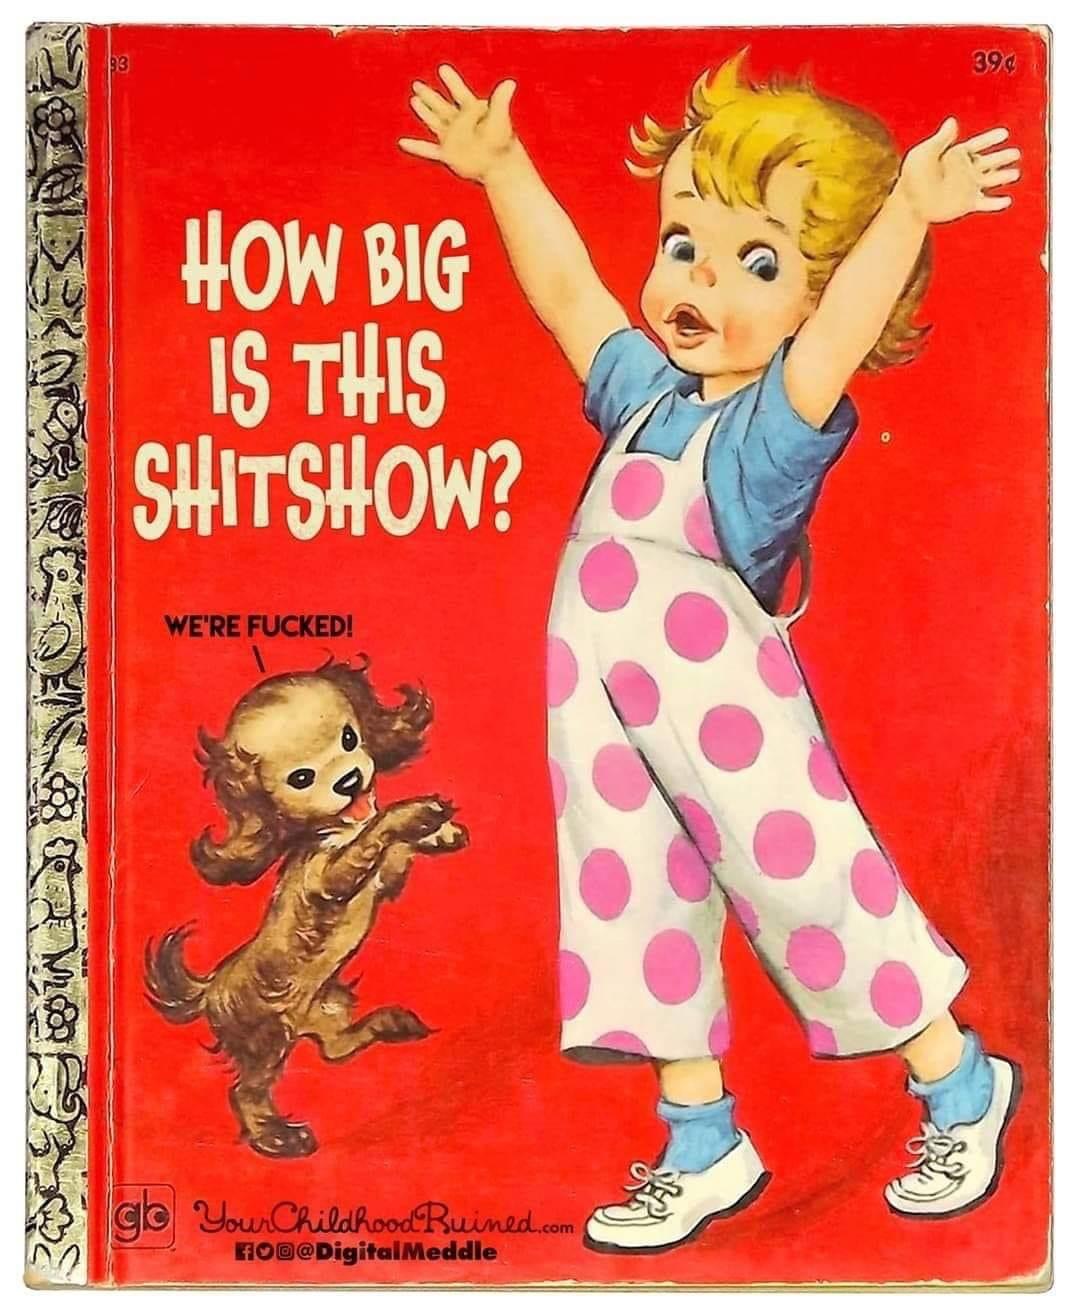 big is this shit show - 39 How Big Is This Shitshow? We'Re Fucked! De Mor glo Your Childhood Ruined.com Fo@ Meddle